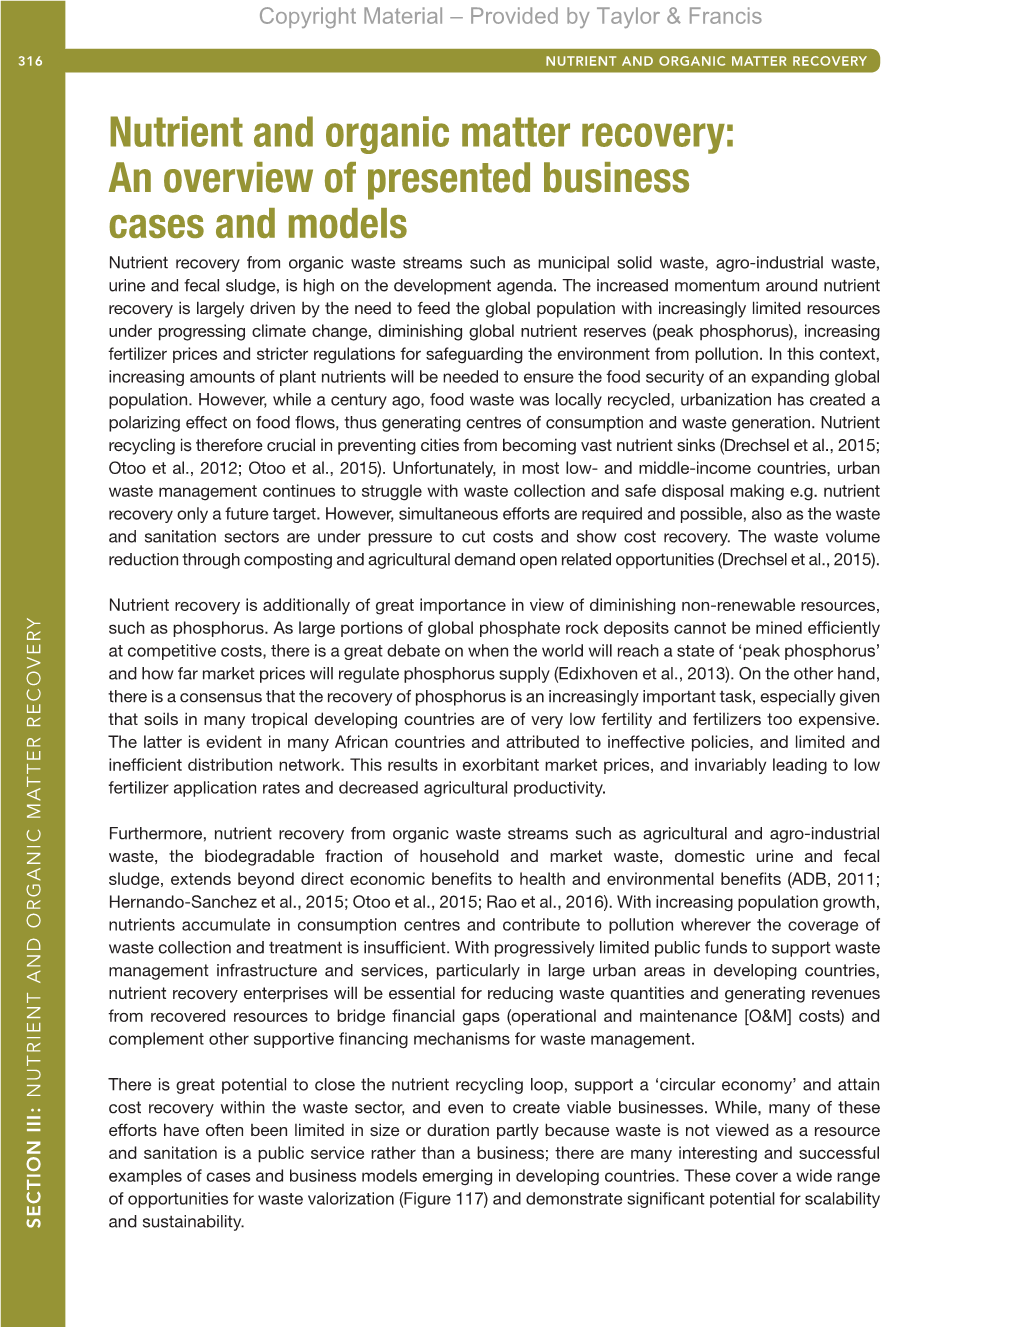 Nutrient and Organic Matter Recovery: an Overview of Presented Business